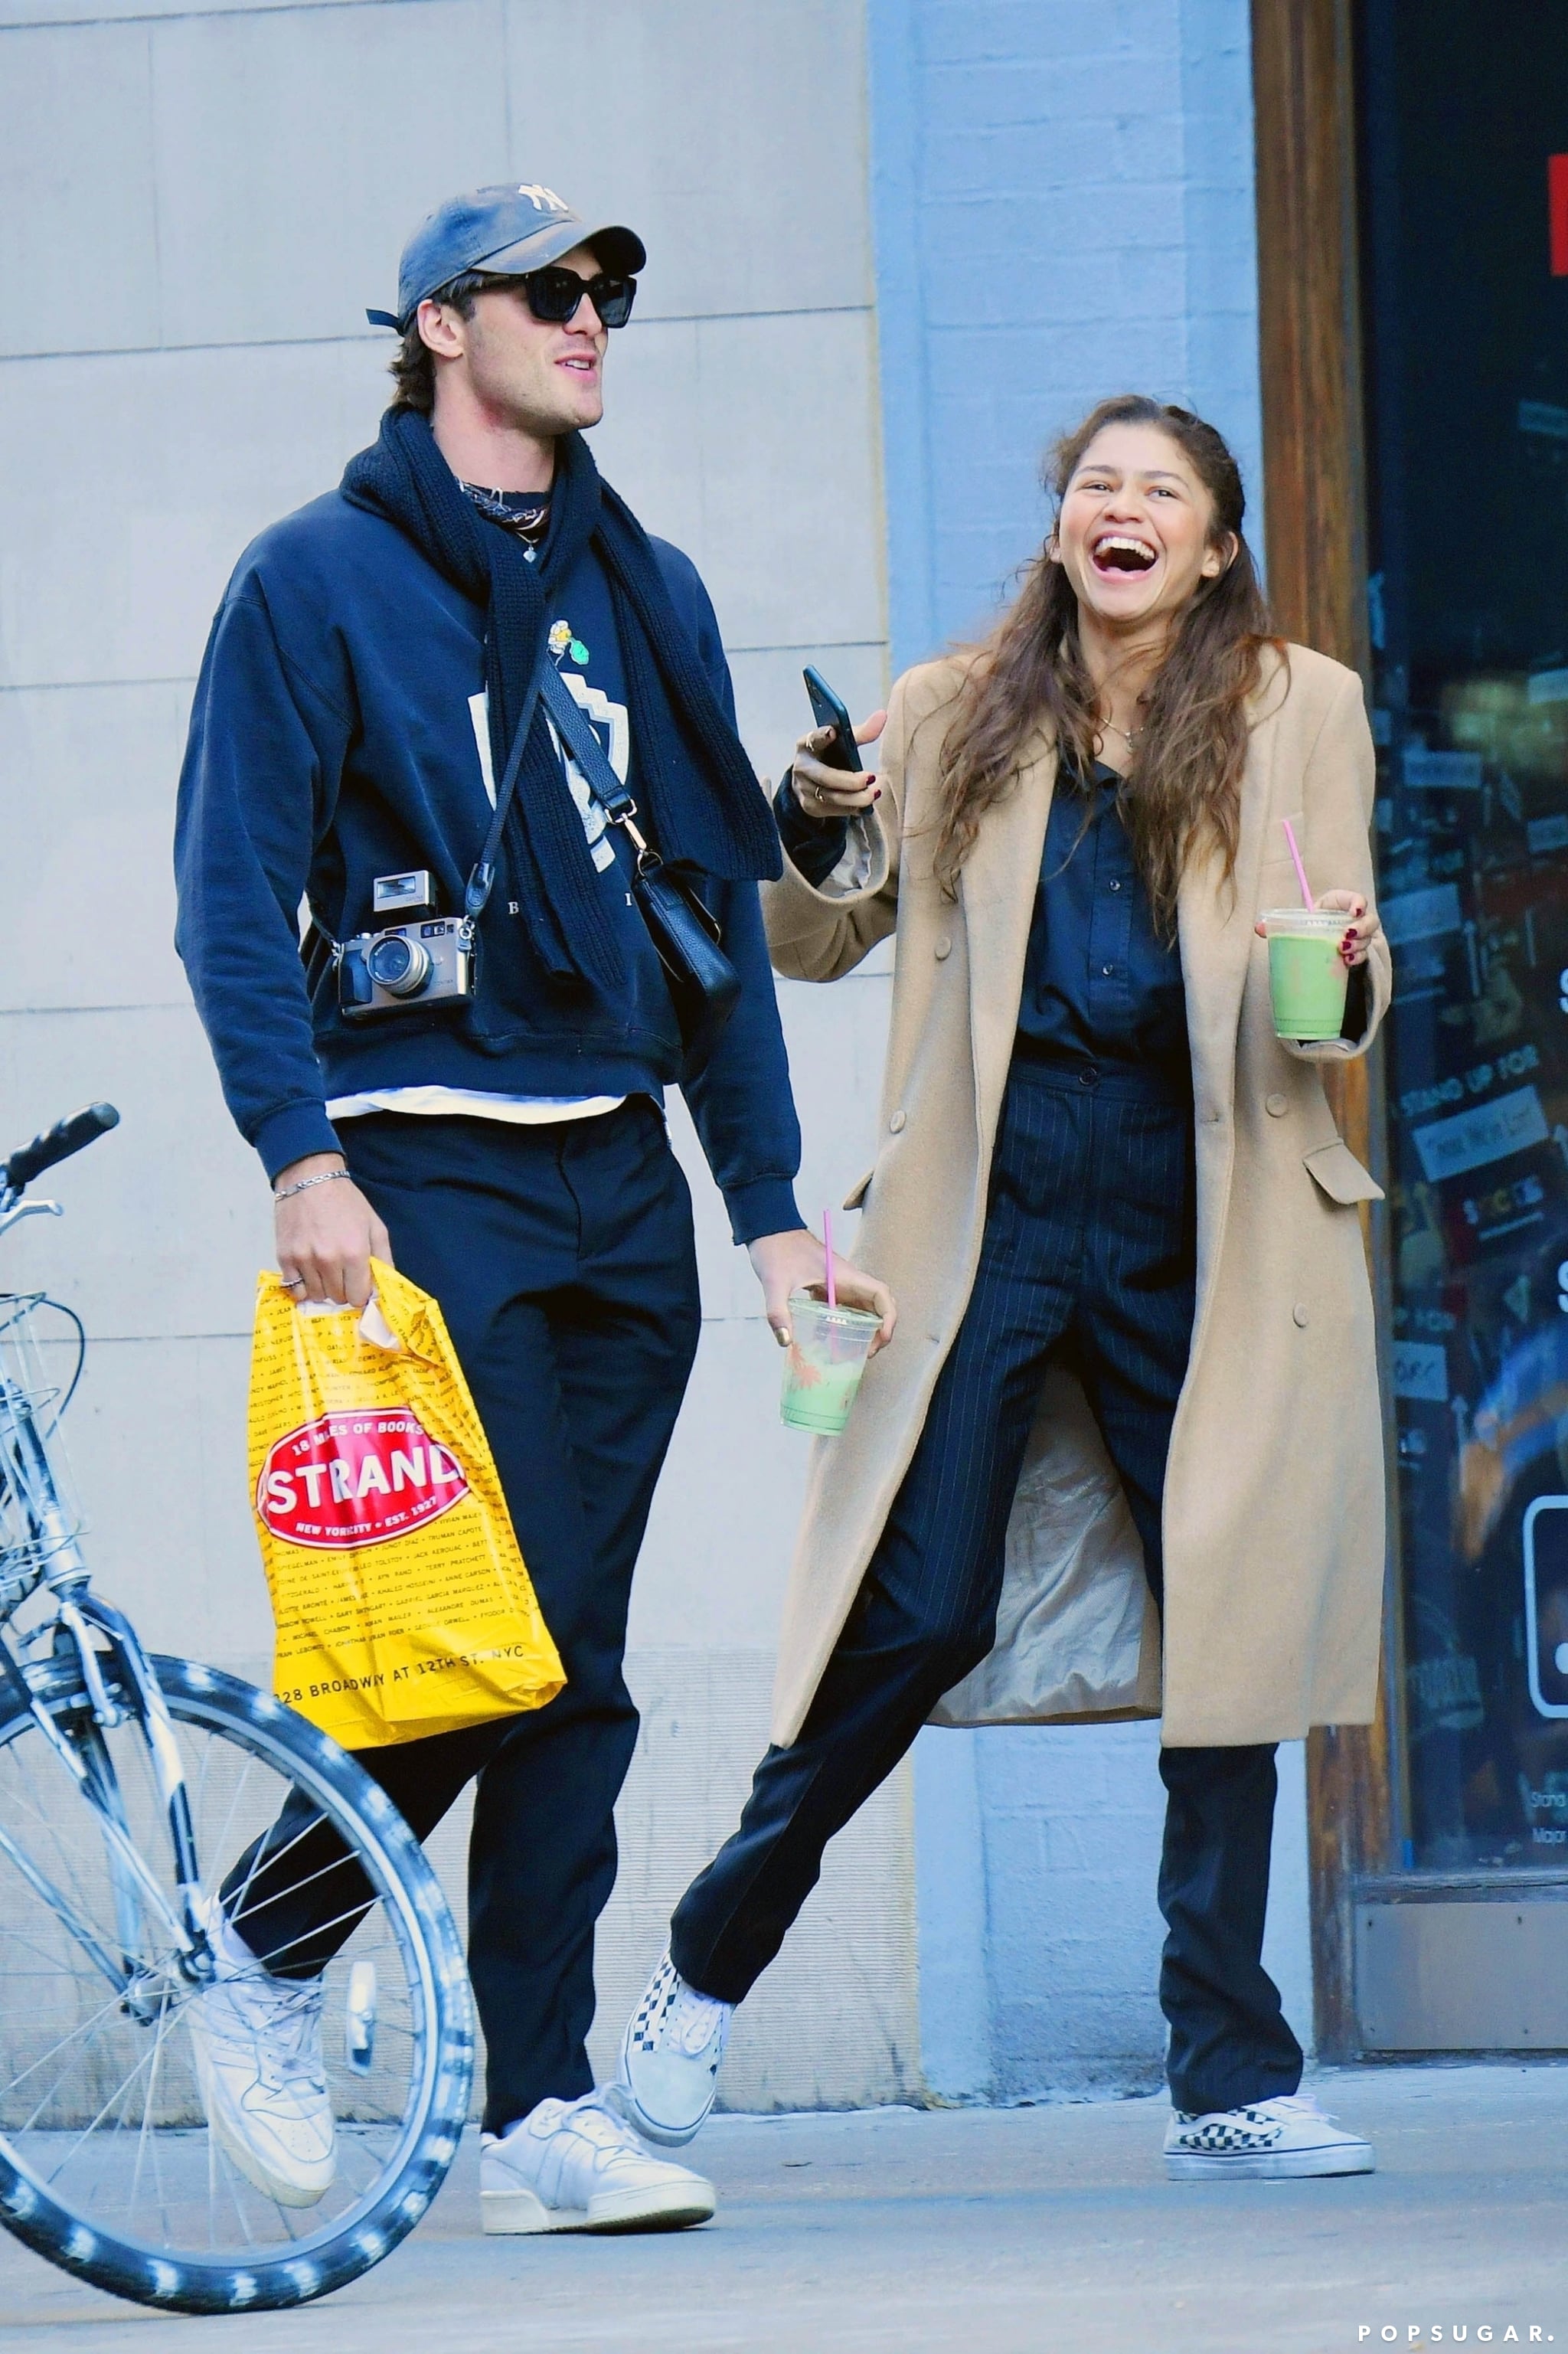 Zendaya and Jacob Elordi Outfits in New York City